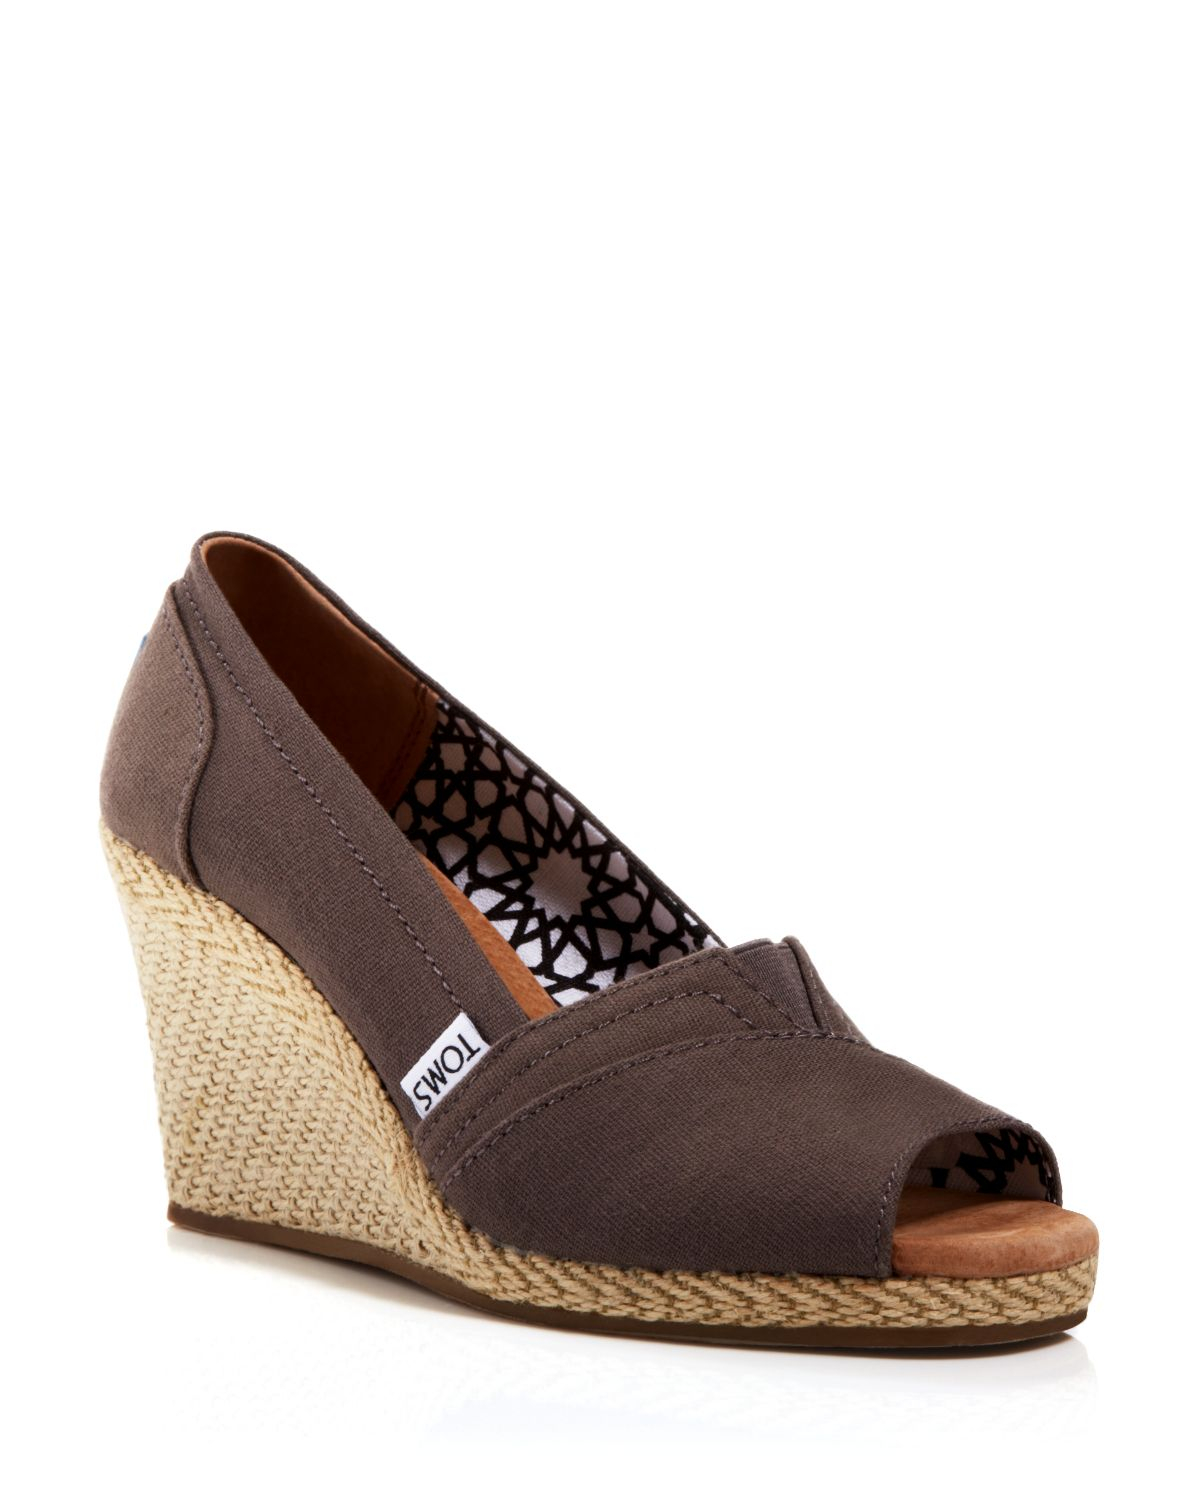 TOMS Espadrille Wedge Sandals - Classic in Brown - Lyst